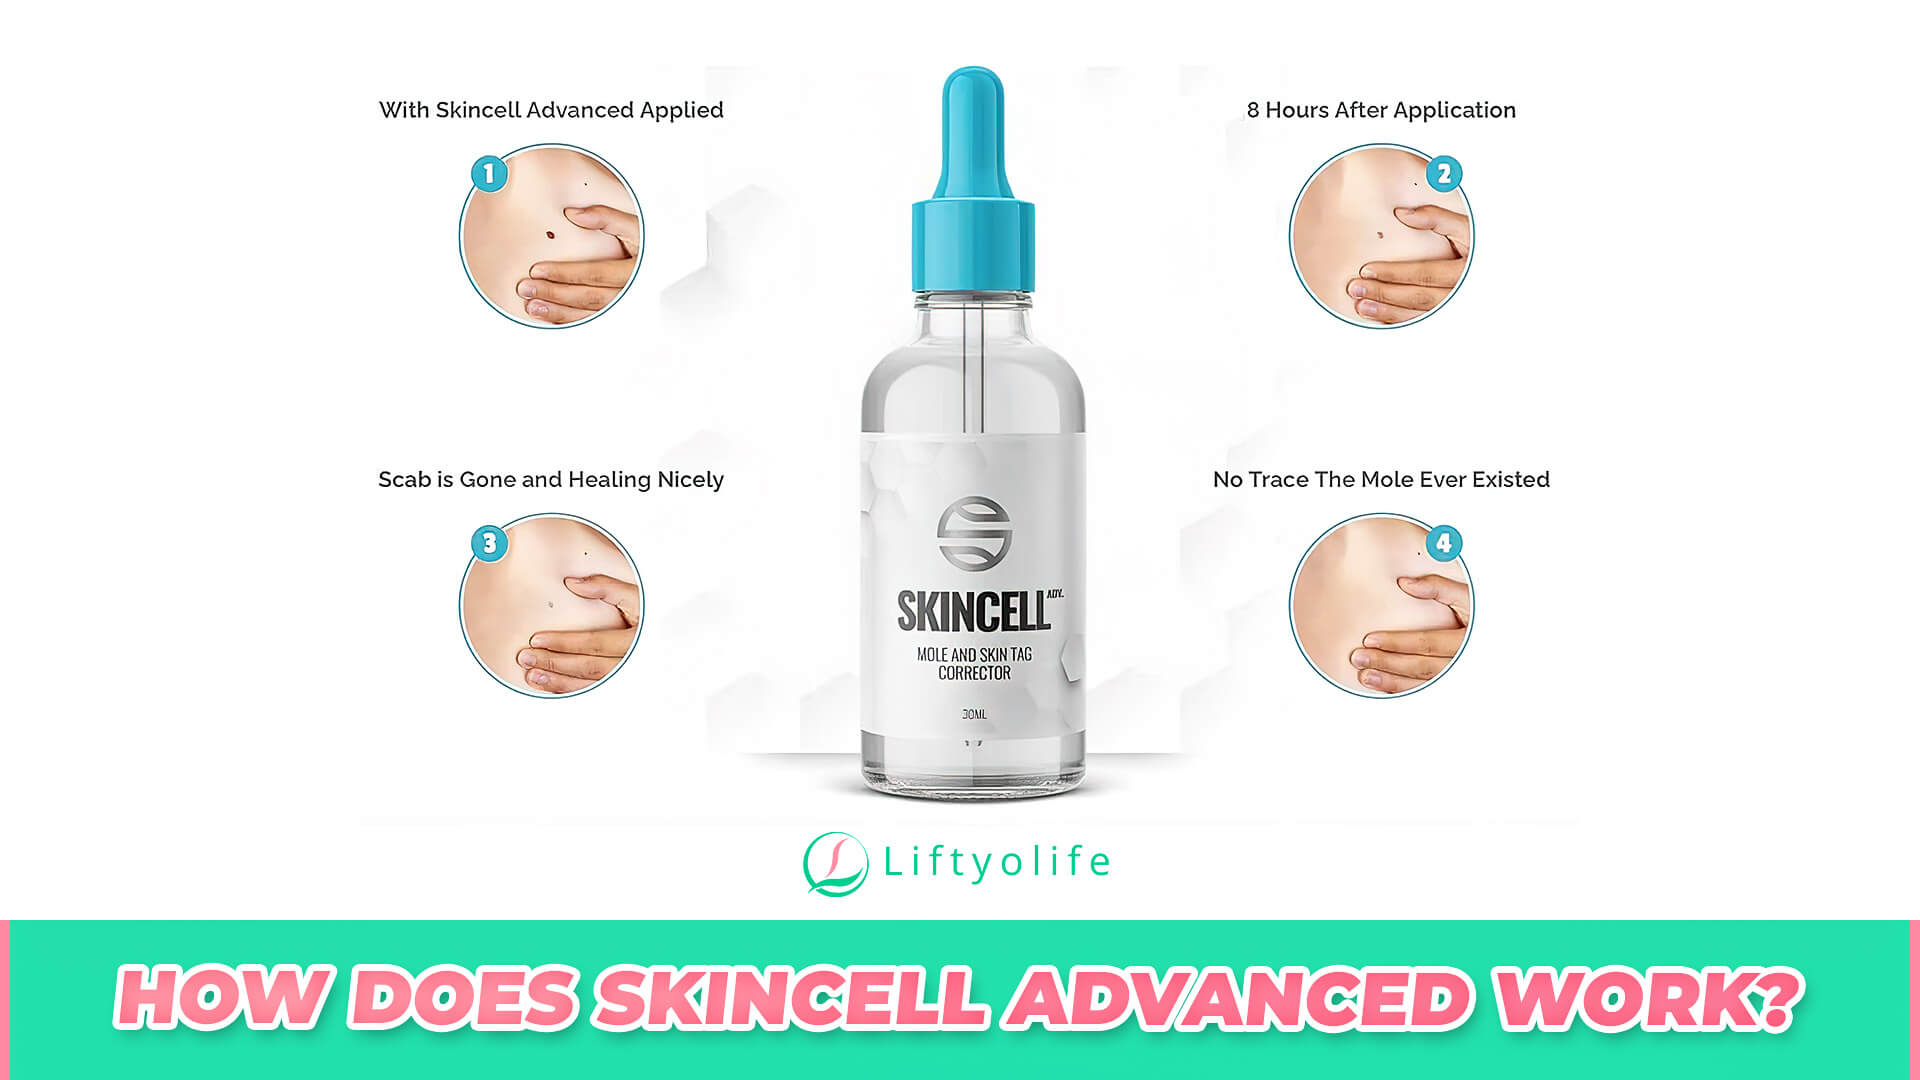 How Does Skincell Advanced Work?